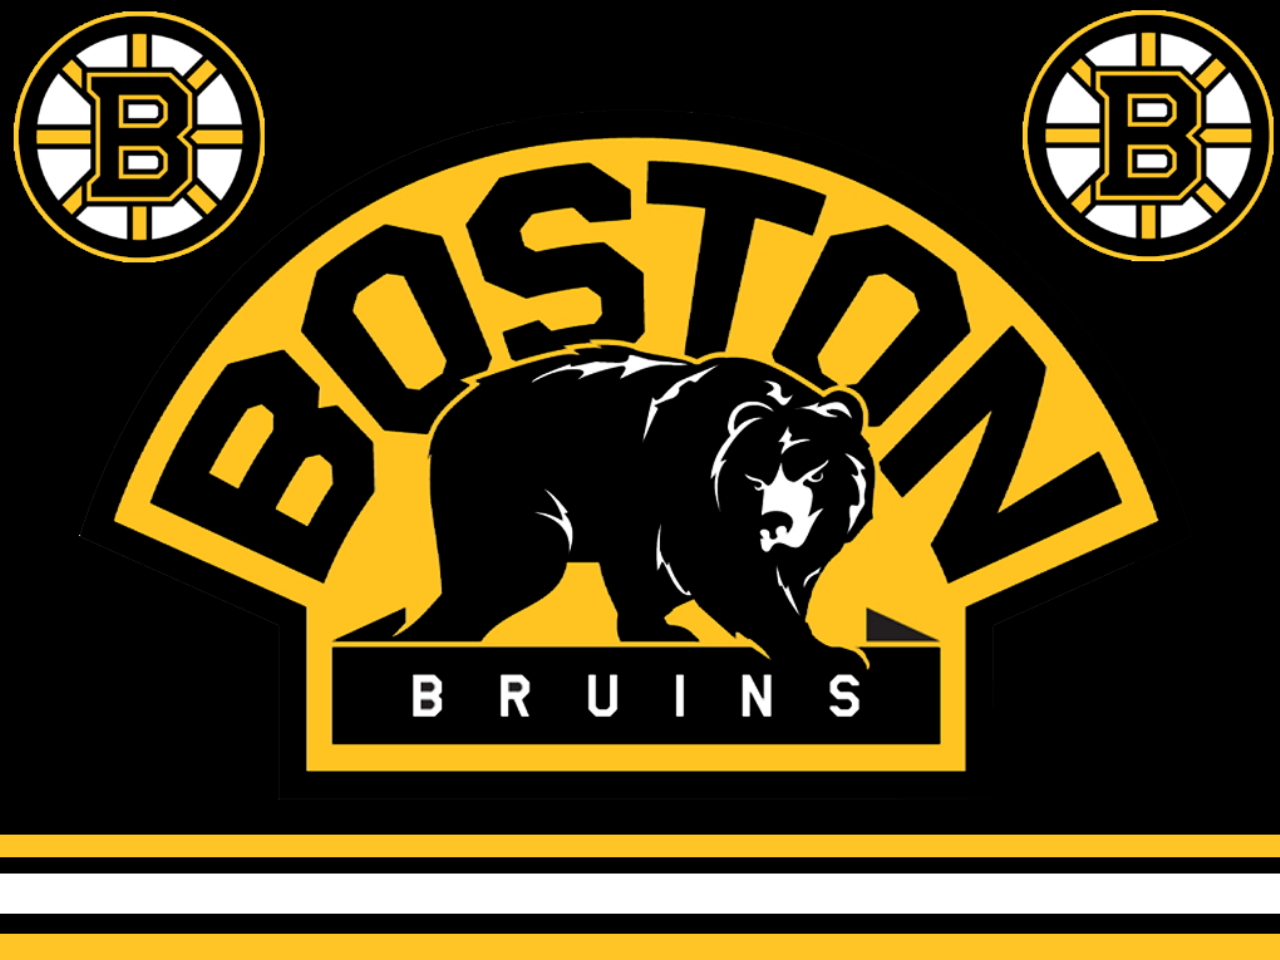 Gallery For > Bruins Wallpapers